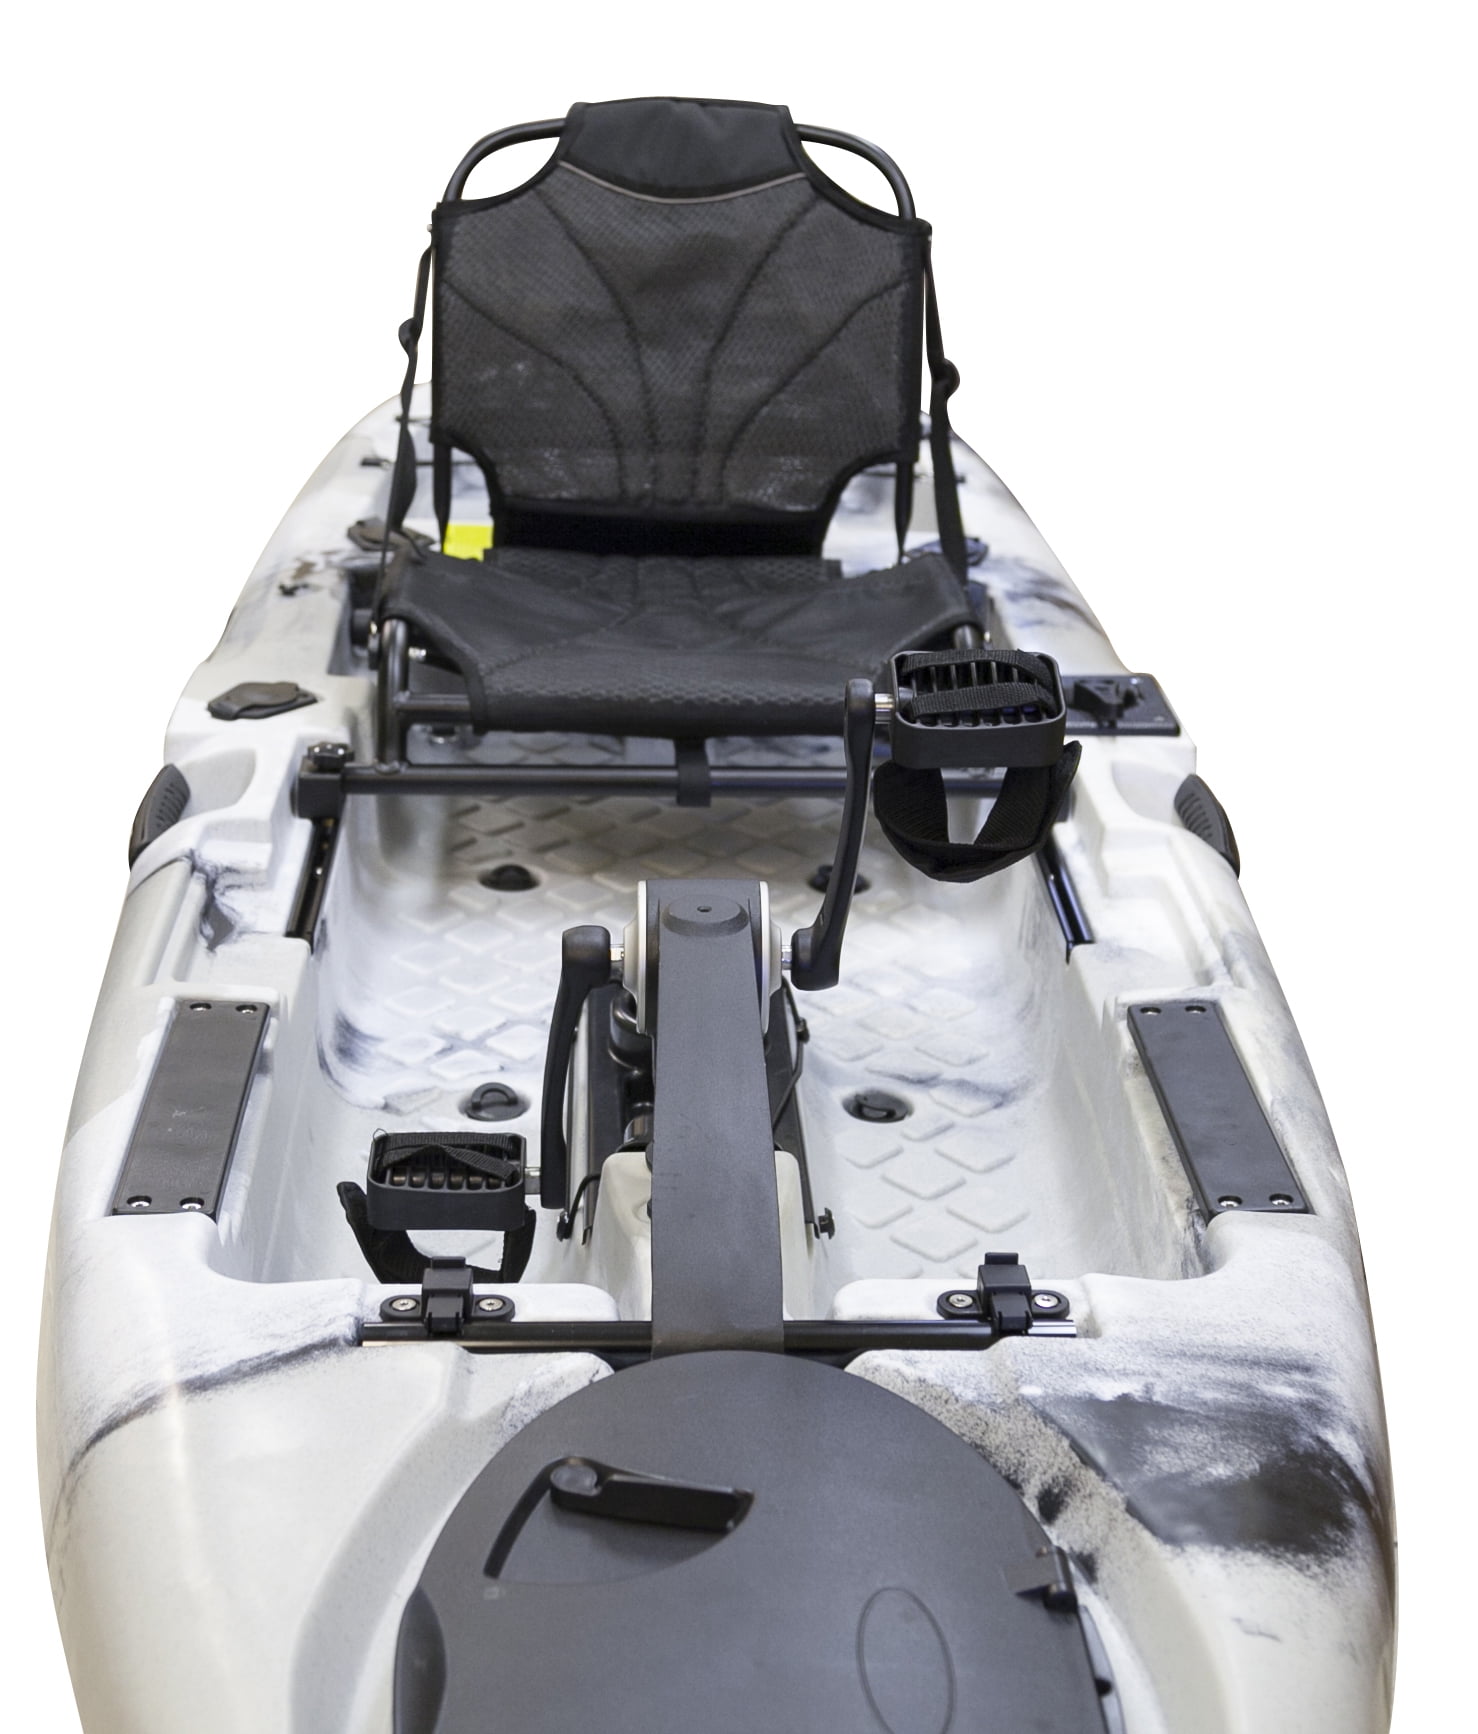 Single 11-Foot Inflatable Fishing Kayak With Pedal Drive System And Seat.